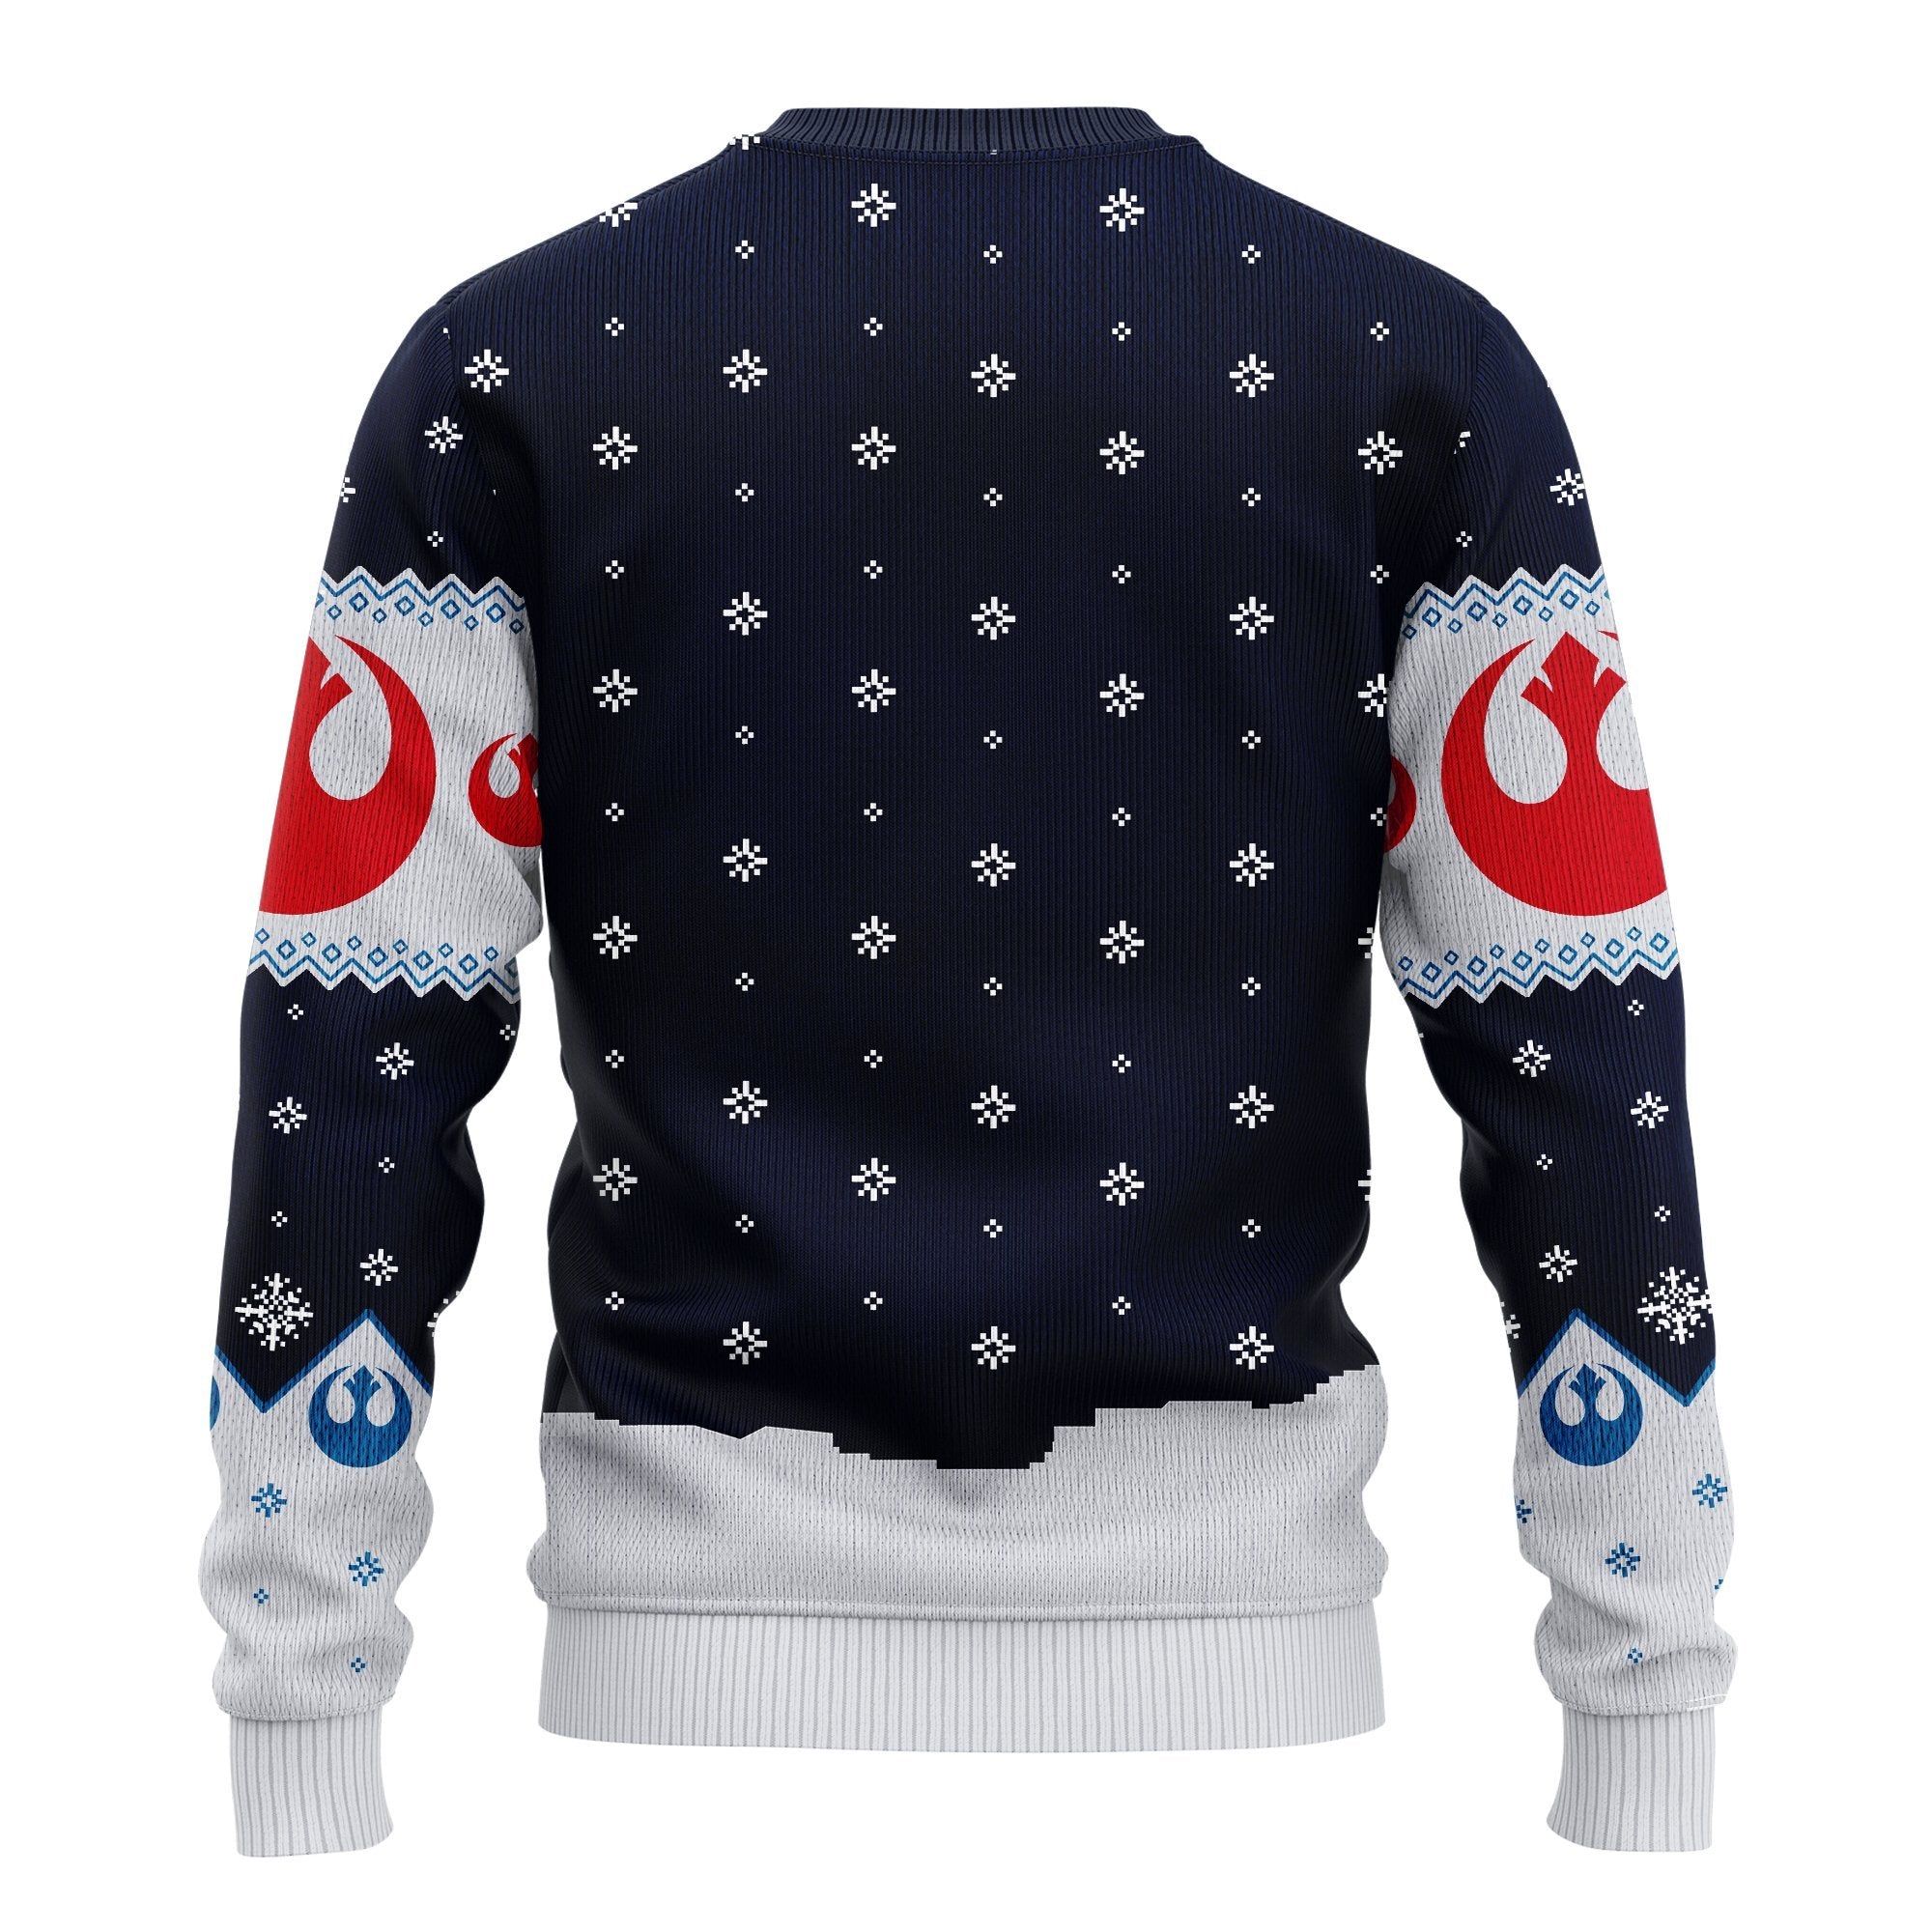 R2 Star Wars Xmas Ugly Christmas Sweater Amazing Gift Idea Thanksgiving Gift